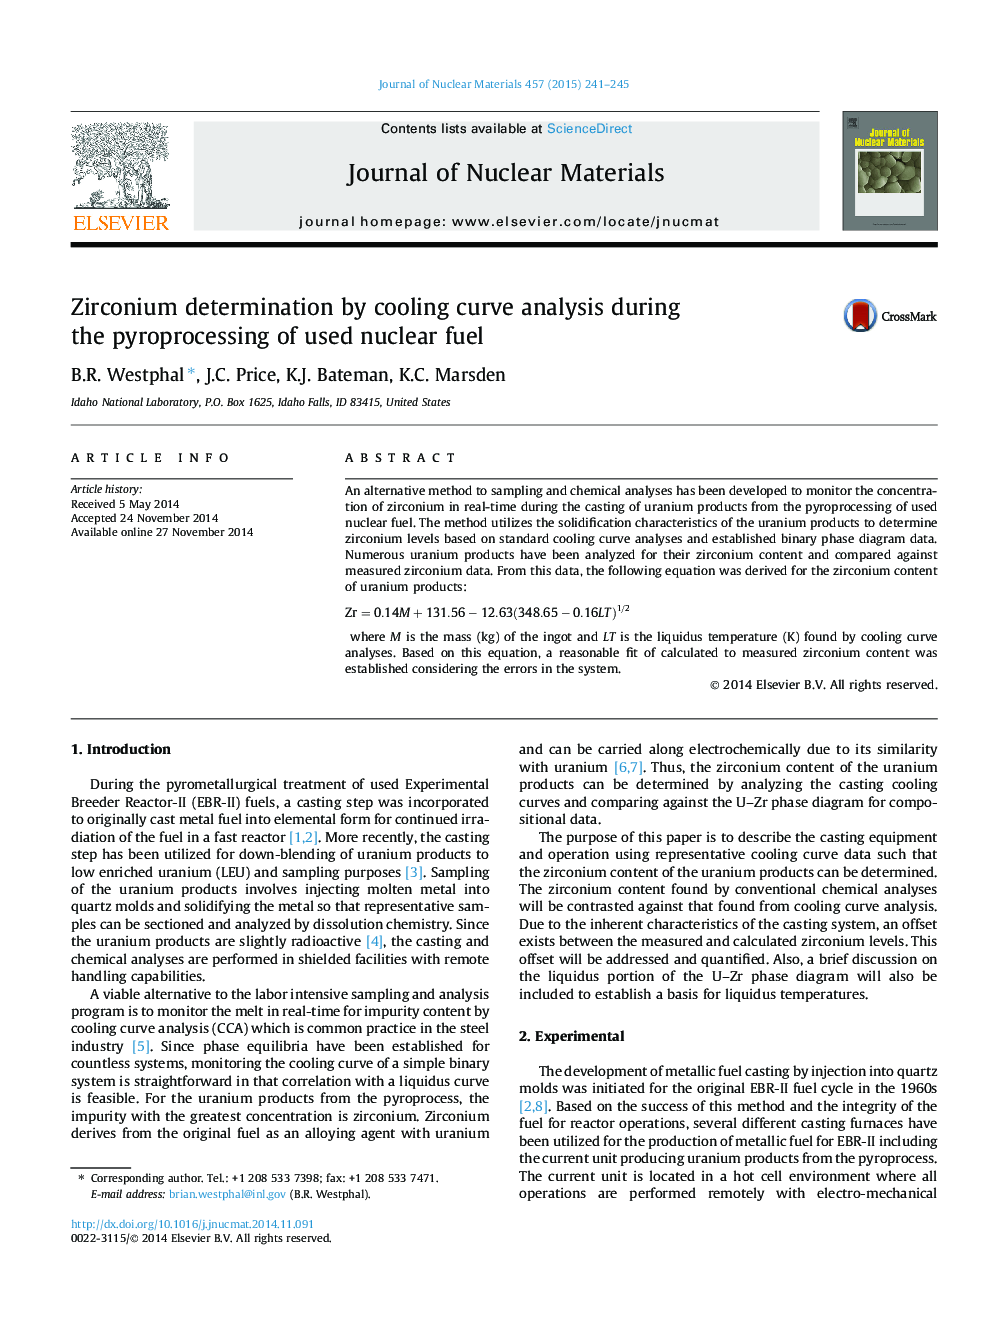 Zirconium determination by cooling curve analysis during the pyroprocessing of used nuclear fuel